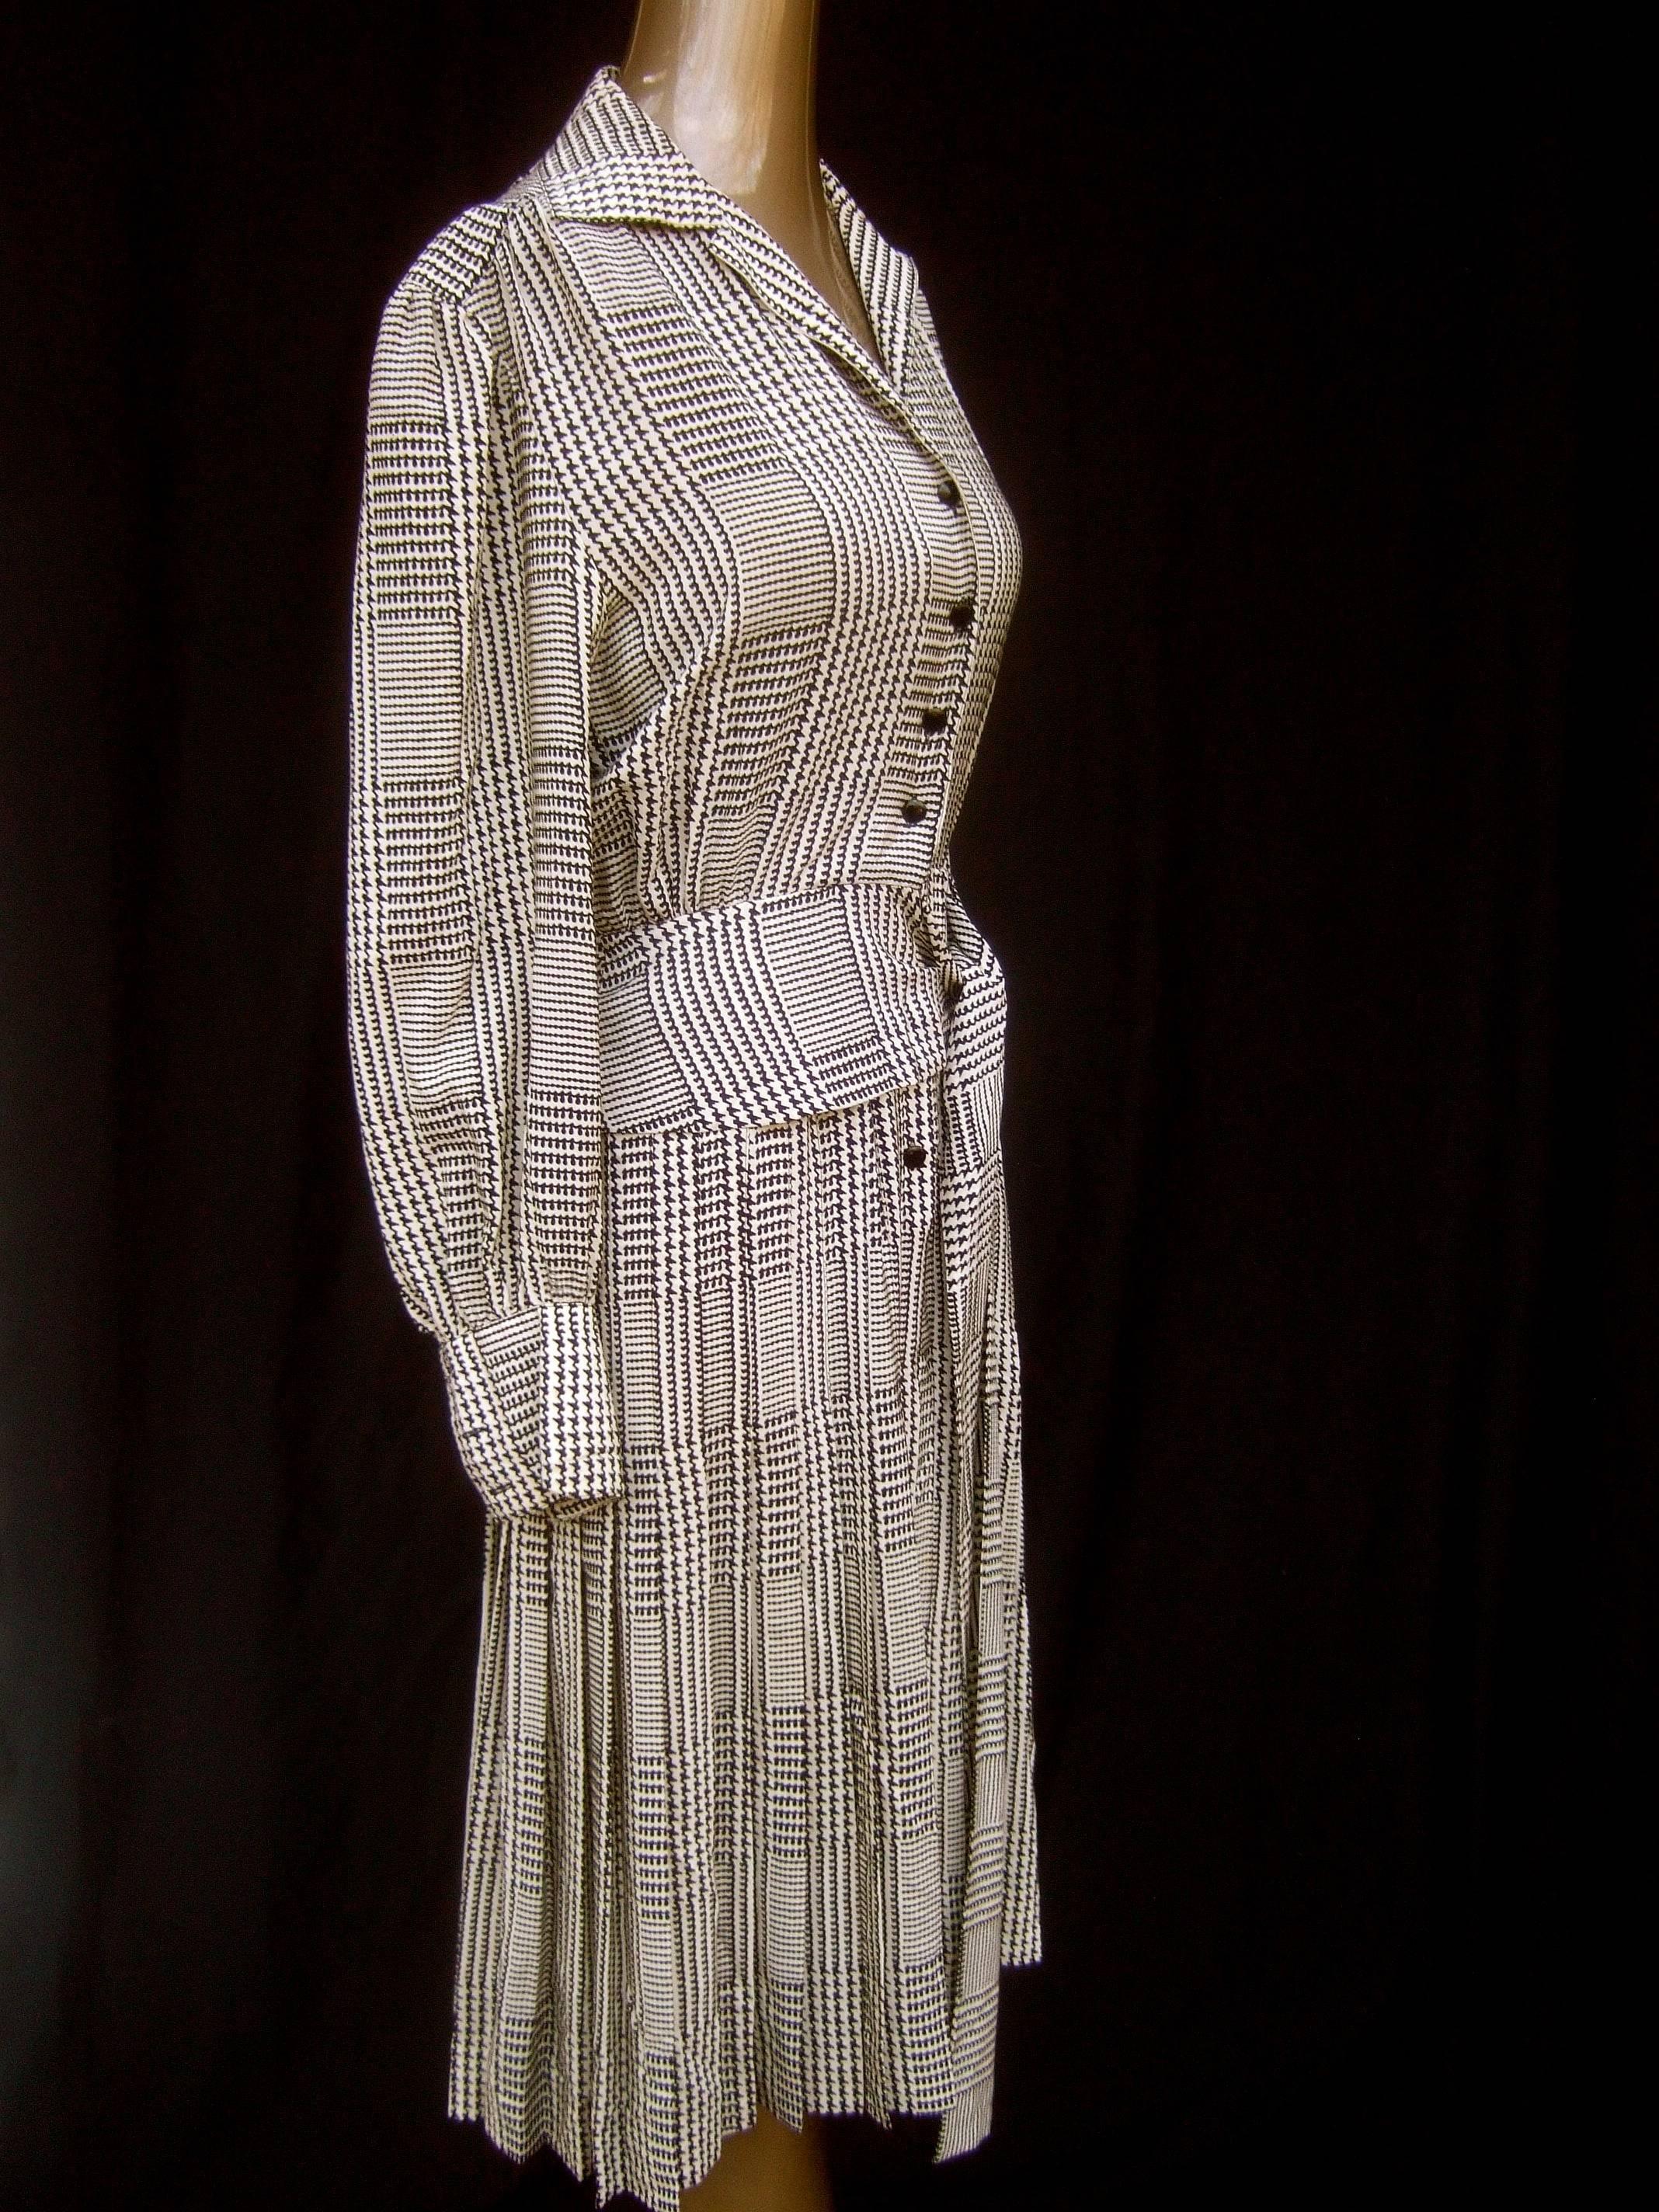 Saint Laurent Rive Gauche silk print belted houndstooth dress c 1980s
The elegant silk dress is designed with black graphics set against
a white silk background in various patterns 

Designed with a built in belt tie that cinches around the